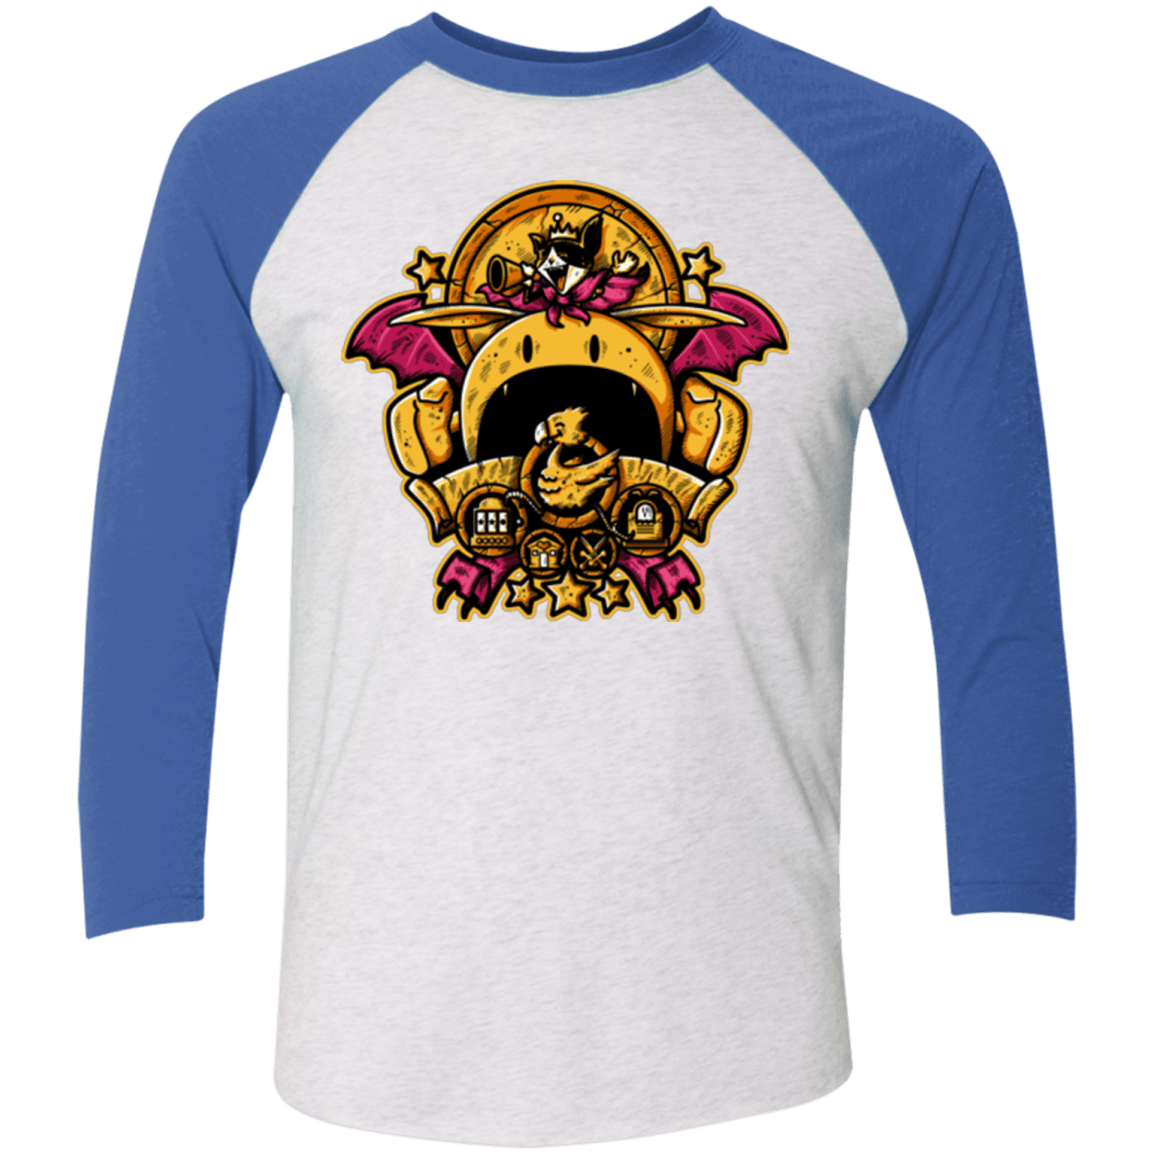 T-Shirts Heather White/Vintage Royal / X-Small SAUCER CREST Men's Triblend 3/4 Sleeve